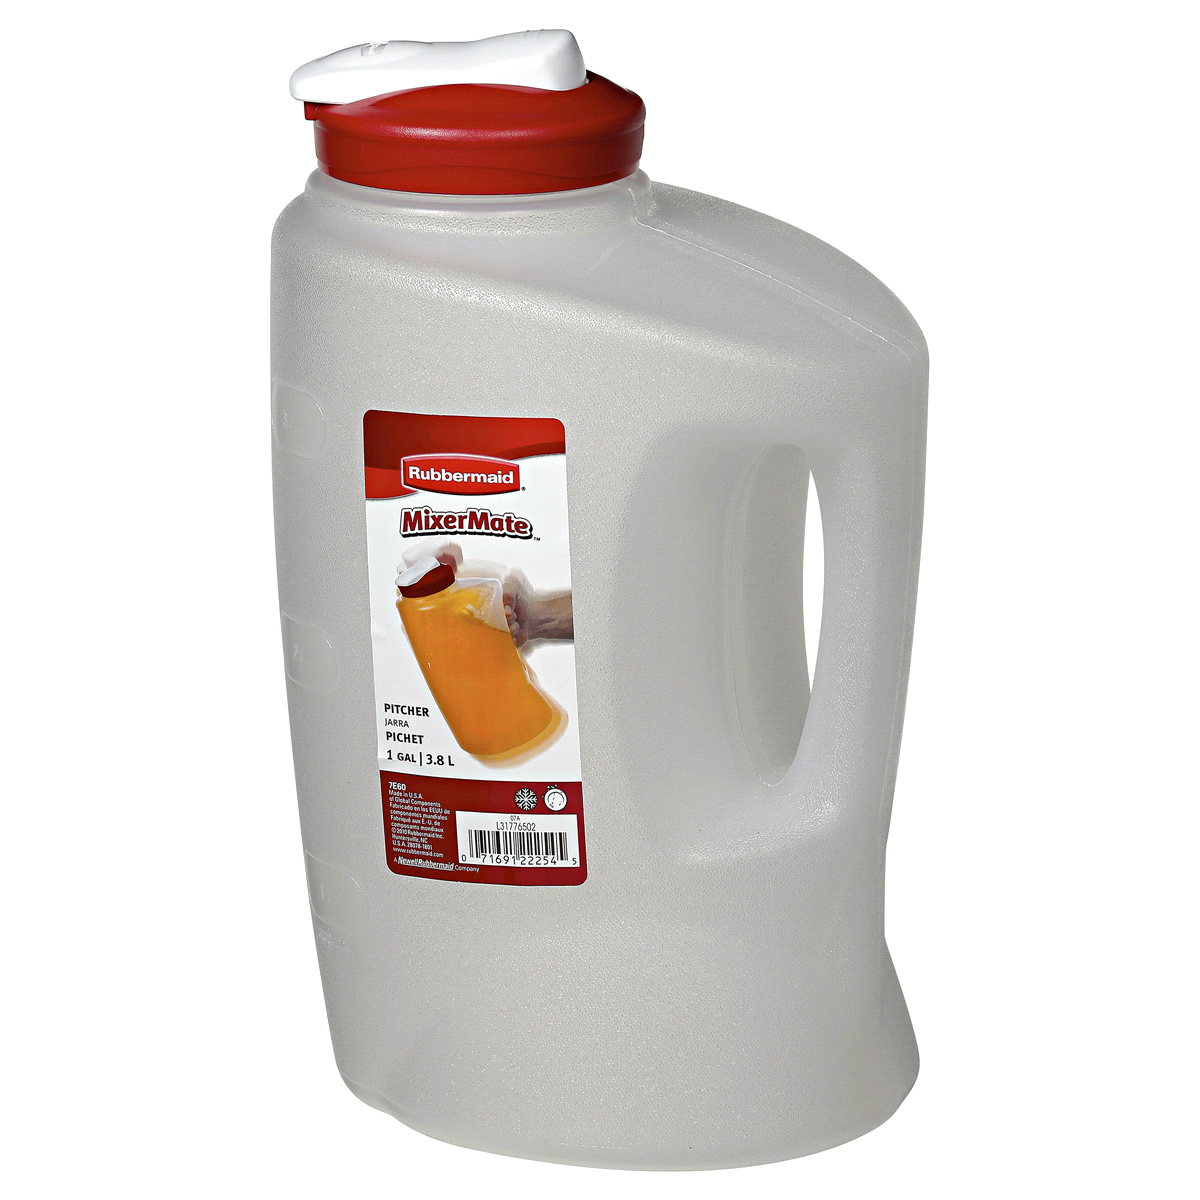 slide 2 of 3, Rubbermaid MixerMate Pitcher, 1 gal